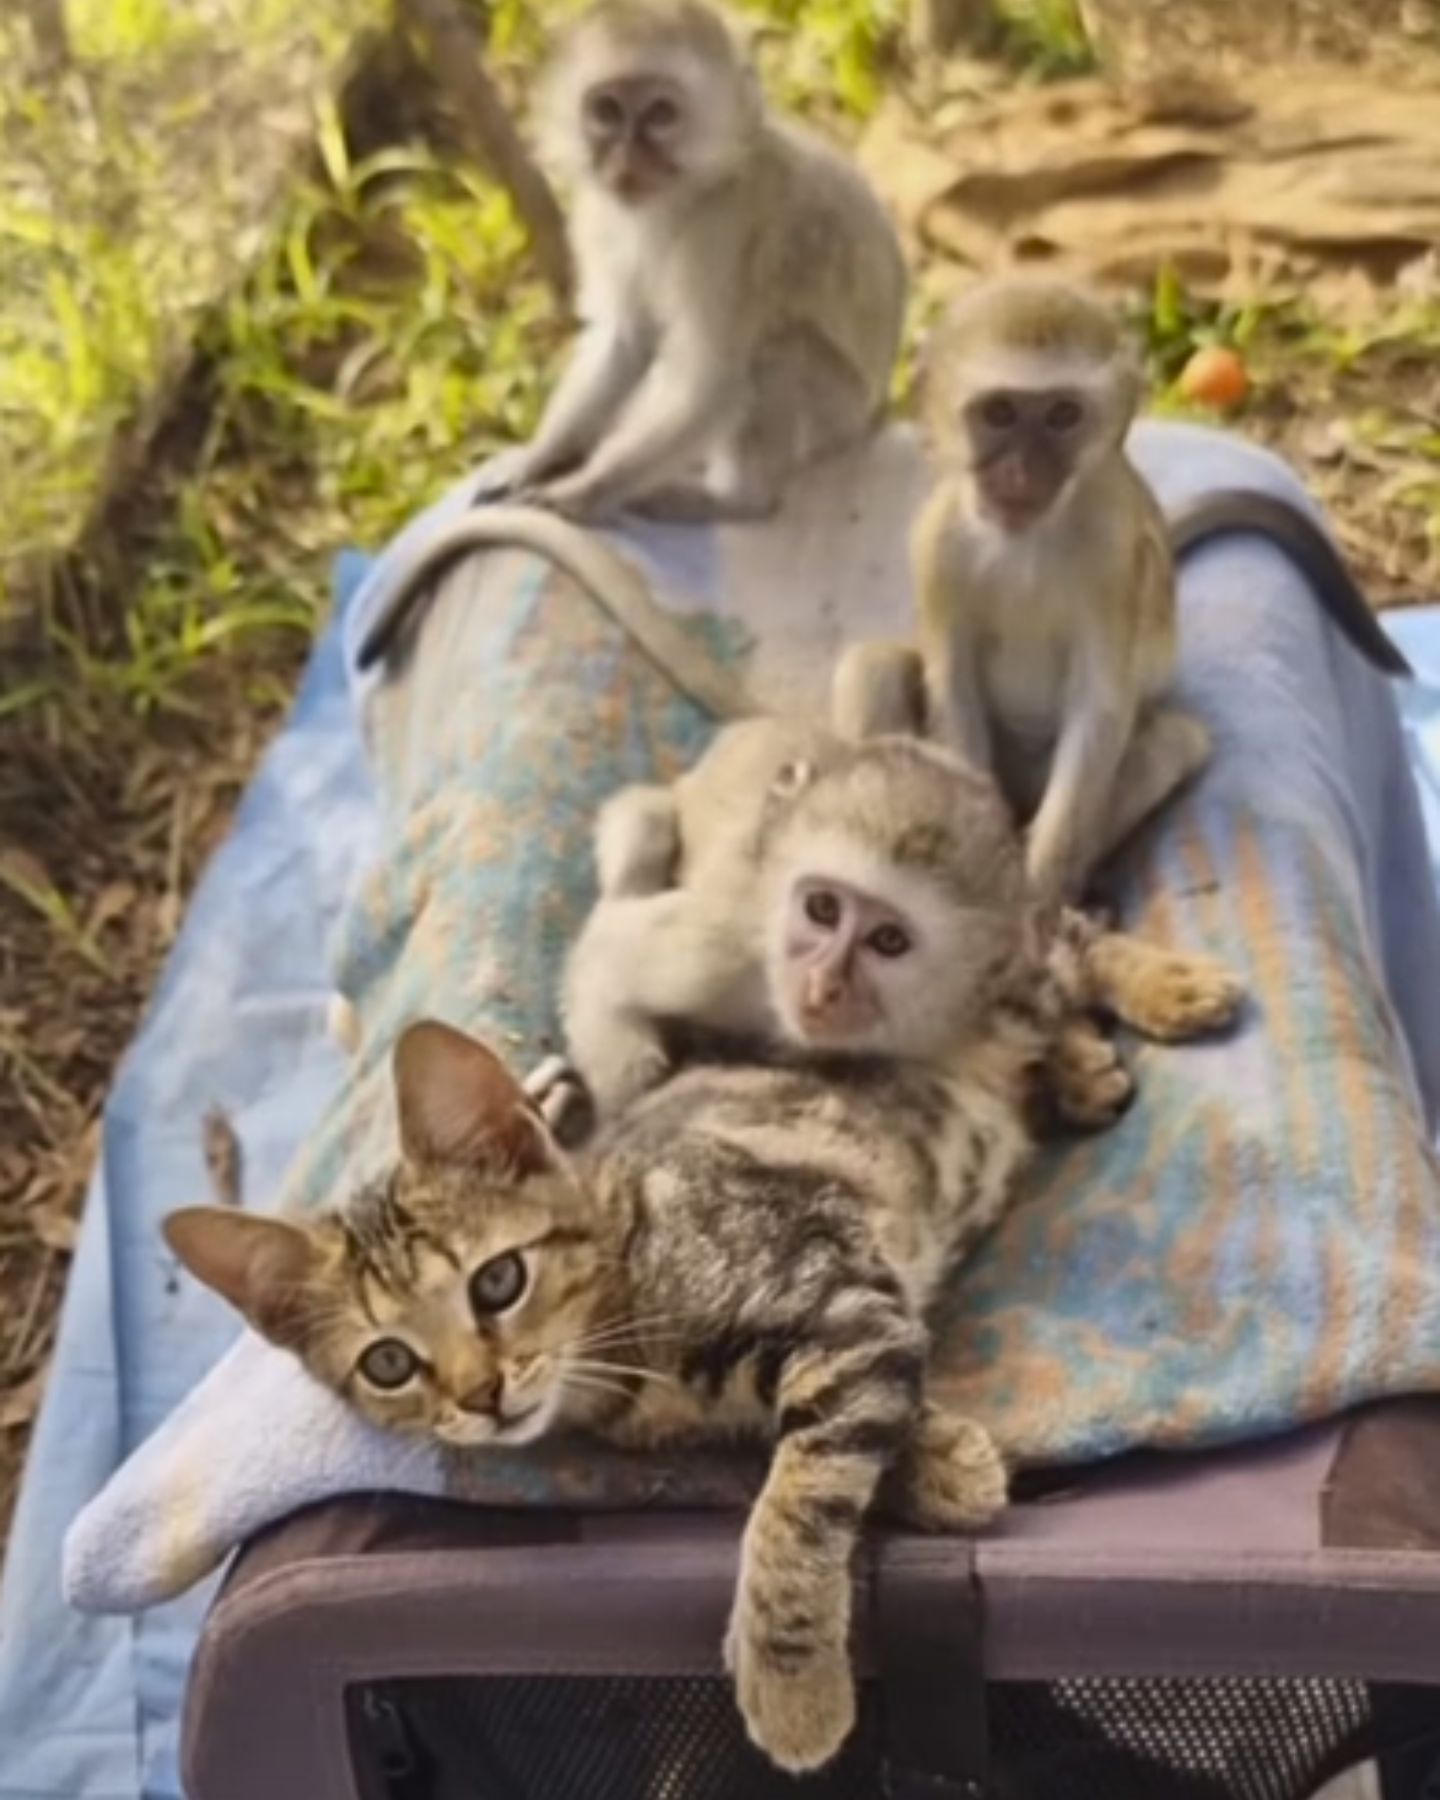 monkeys and cat laying together